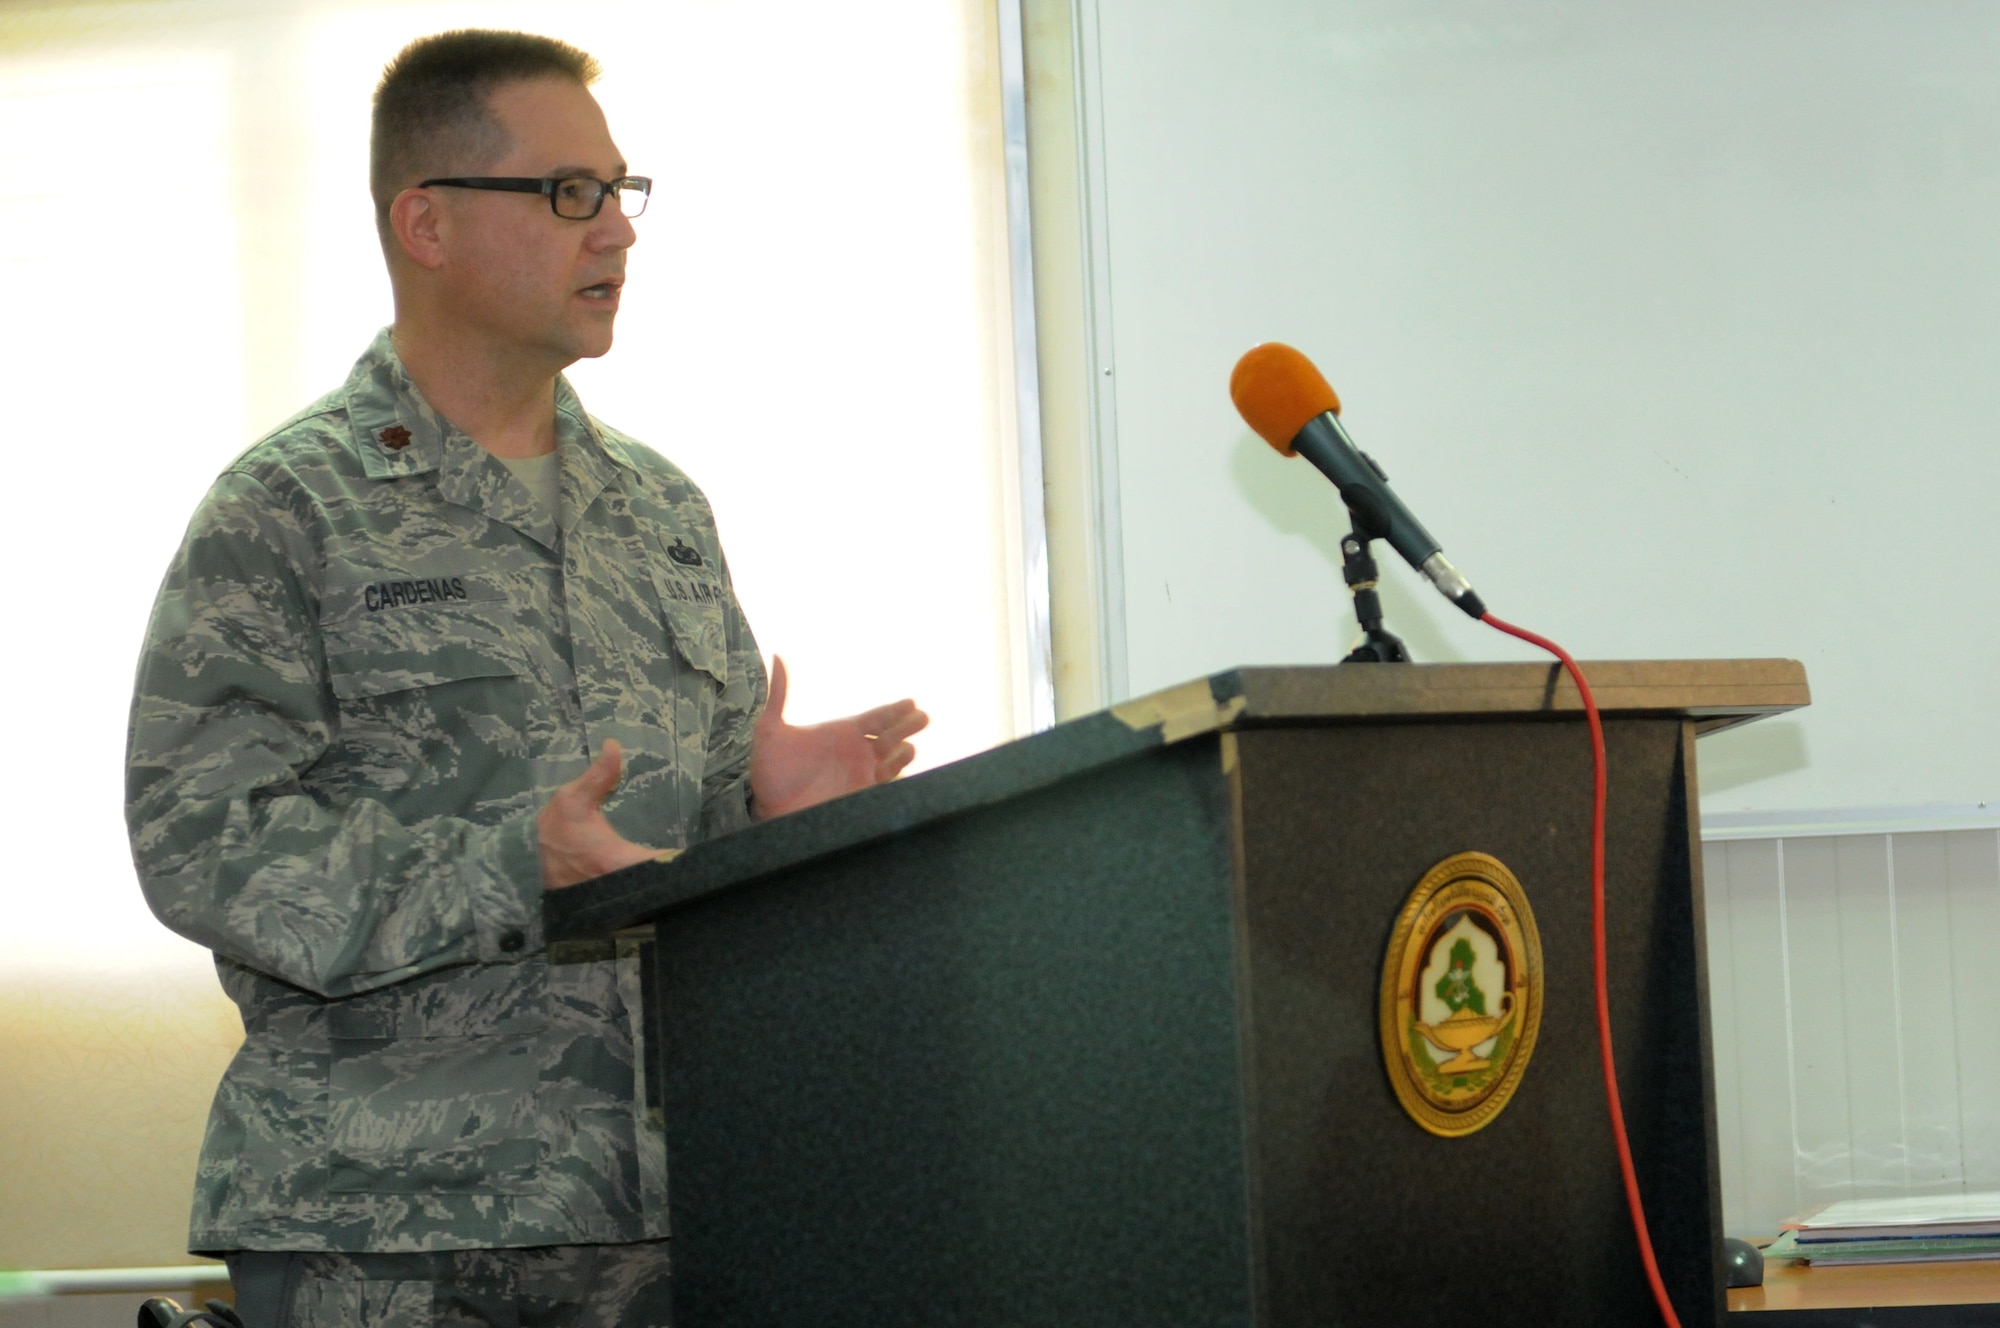 BAGHDAD - U.S. Air Force Maj. Jose A. Cardenas, 445th Airlift Wing Public Affairs, currently deployed as the Deputy Public Affairs Officer to the U.S. Forces-Iraq Deputy Commanding General for Advising and Training, serves as a guest lecturer at the Iraqi Ministry of Defense’s Advanced Broadcasting and Television Production Workshop conducted at the MoD’s Ministerial Developmental and Training Center here on March 2. Major Cardenas works in his civilian profession as a professor with the Department of Telecommunications at Bowling Green State University in Bowling Green, Ohio. (U.S. Army photo/Spc. Breeanna DuBuke)